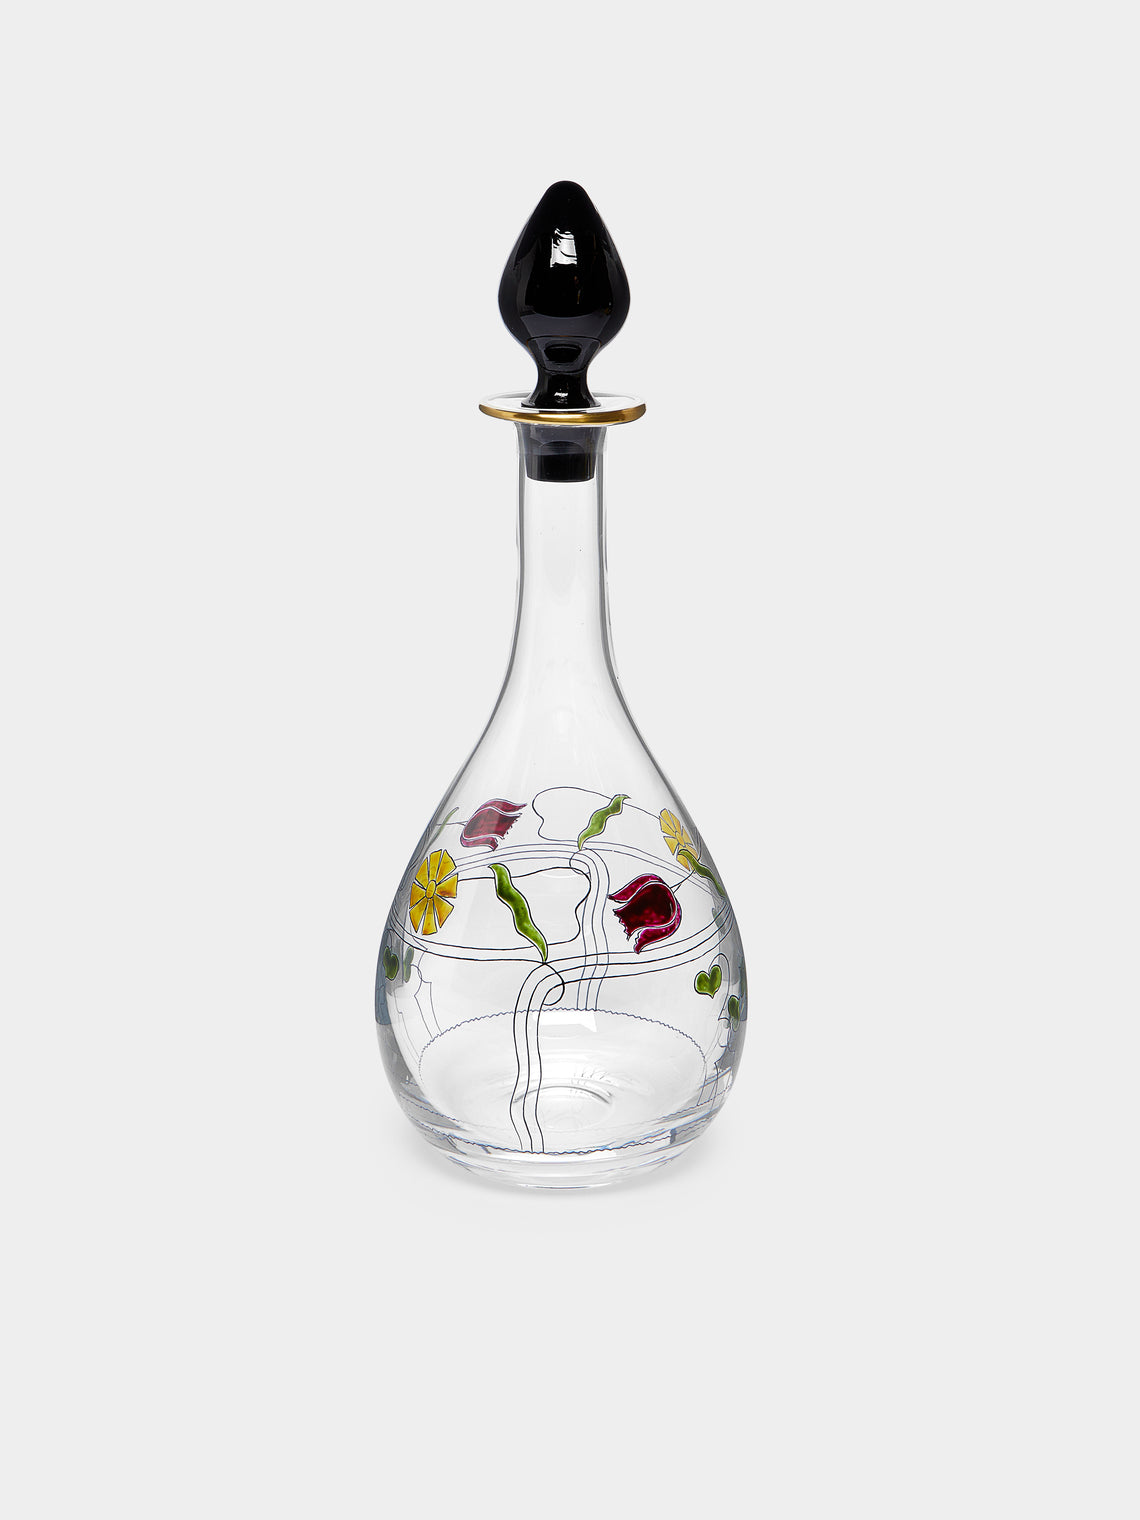 Theresienthal - Serenade Hand-Painted Crystal Wine Decanter -  - ABASK - 